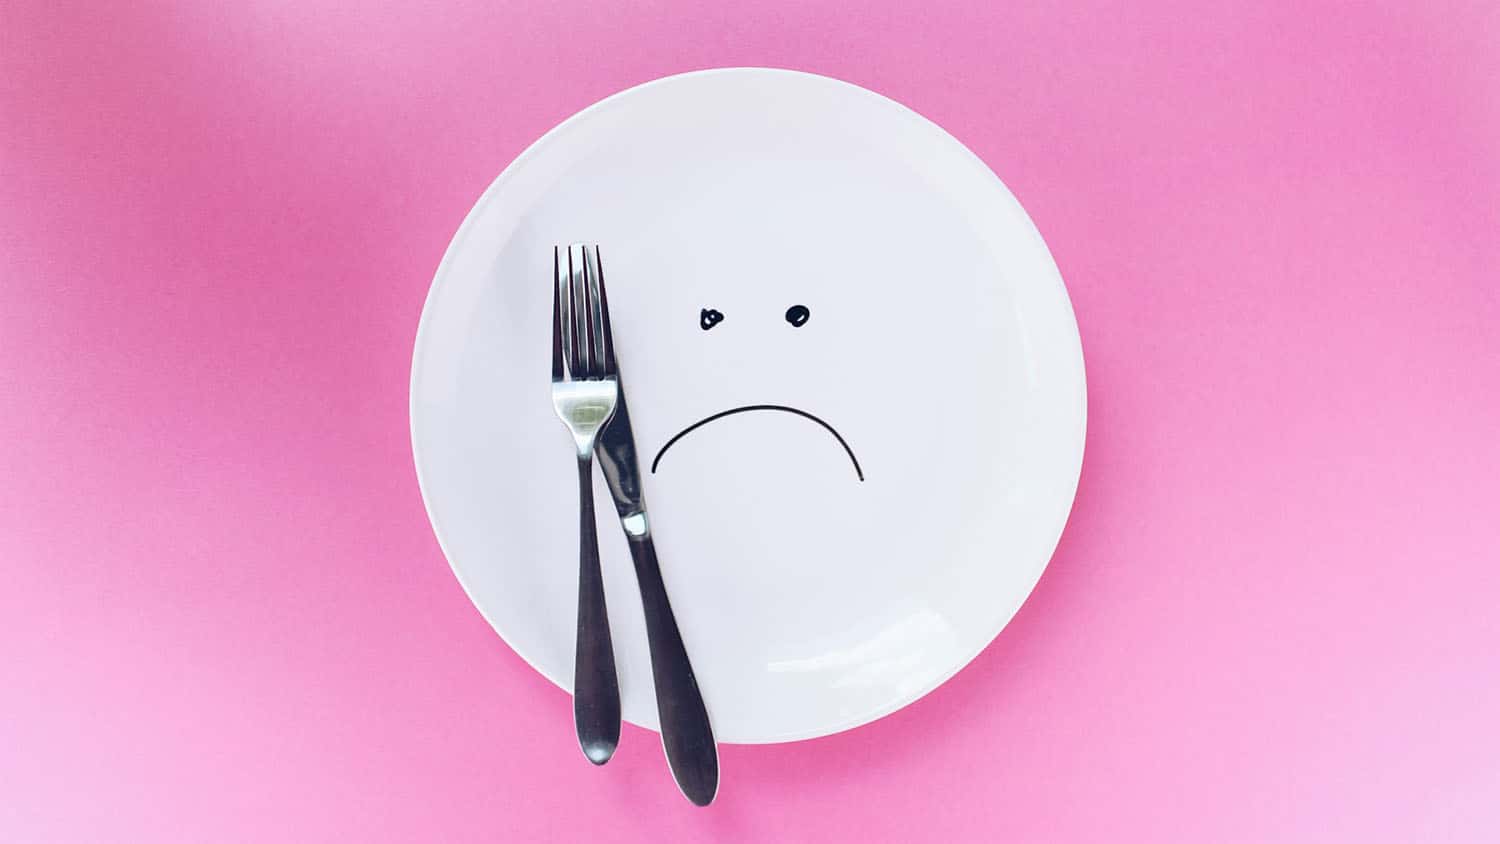 photo shows a plate on a pink background. The plate has a frowny face drawn on it. A knife and fork rest on the plate.